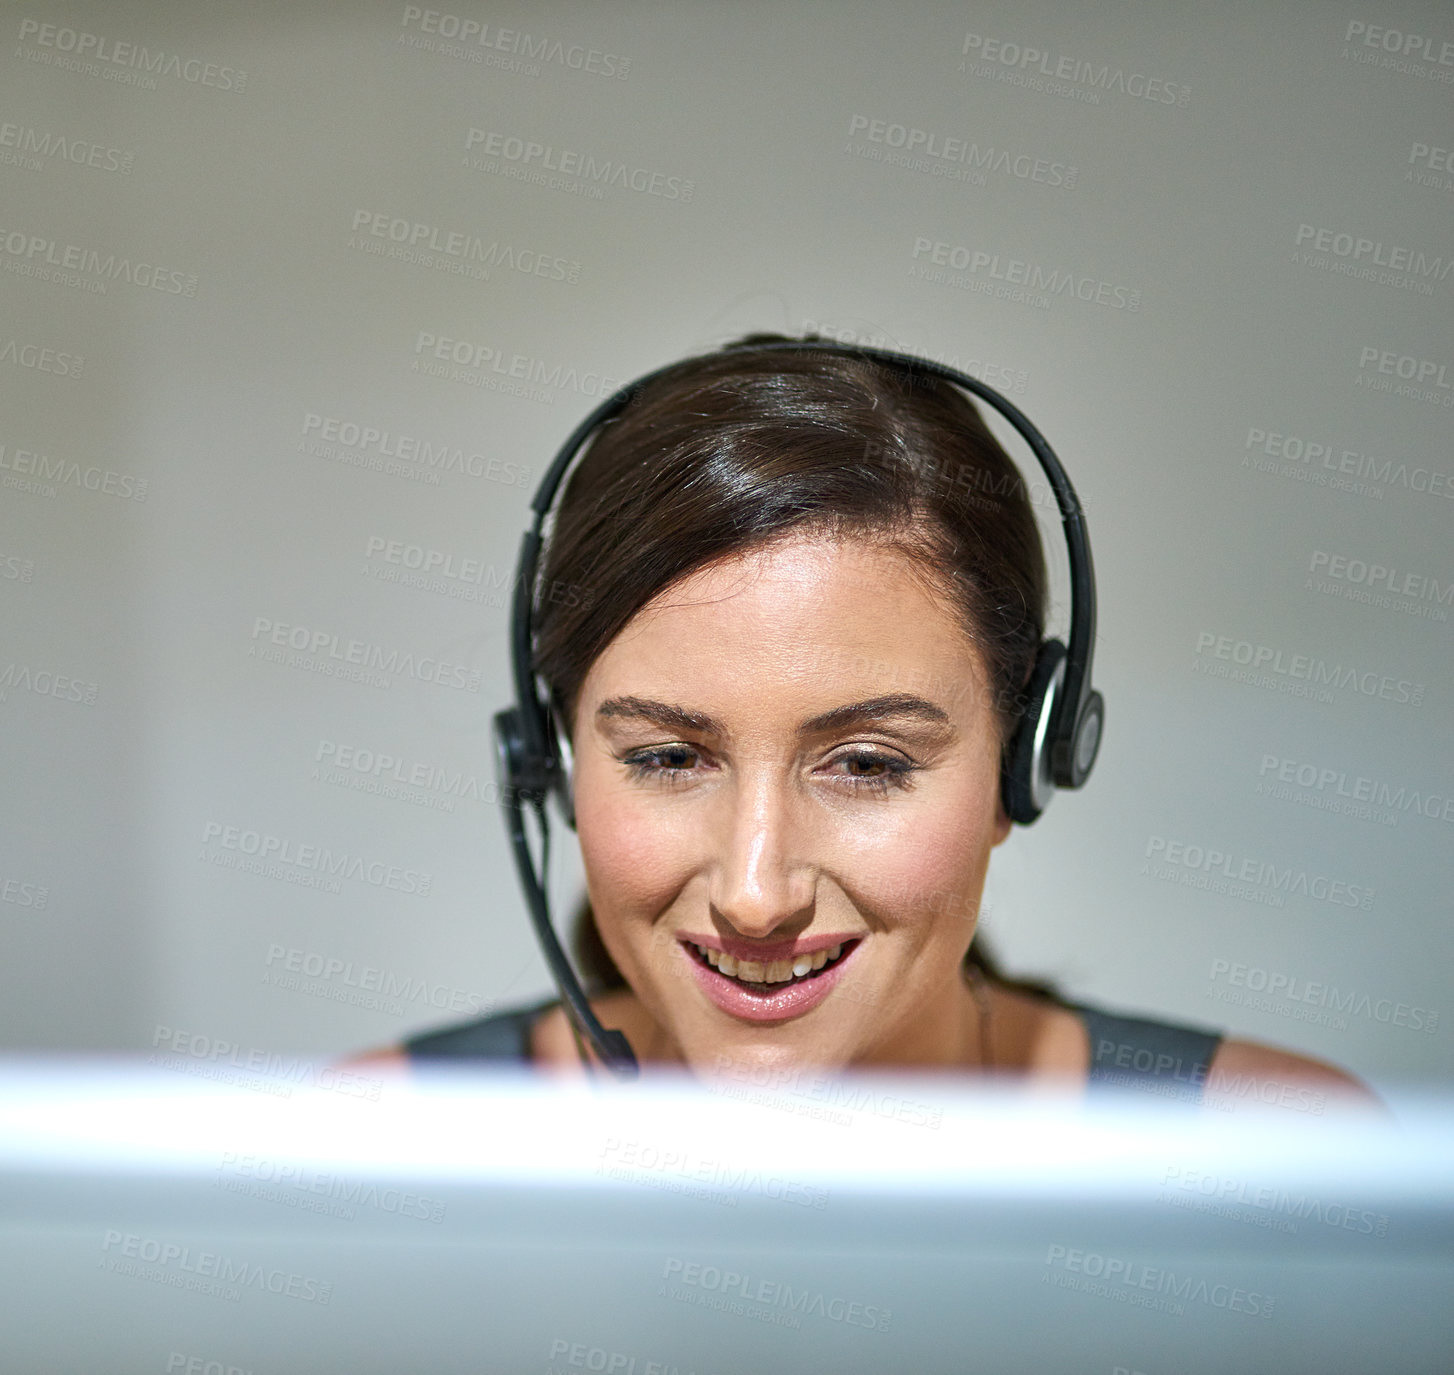 Buy stock photo Shot of a professional woman using a computer and headset at her desk